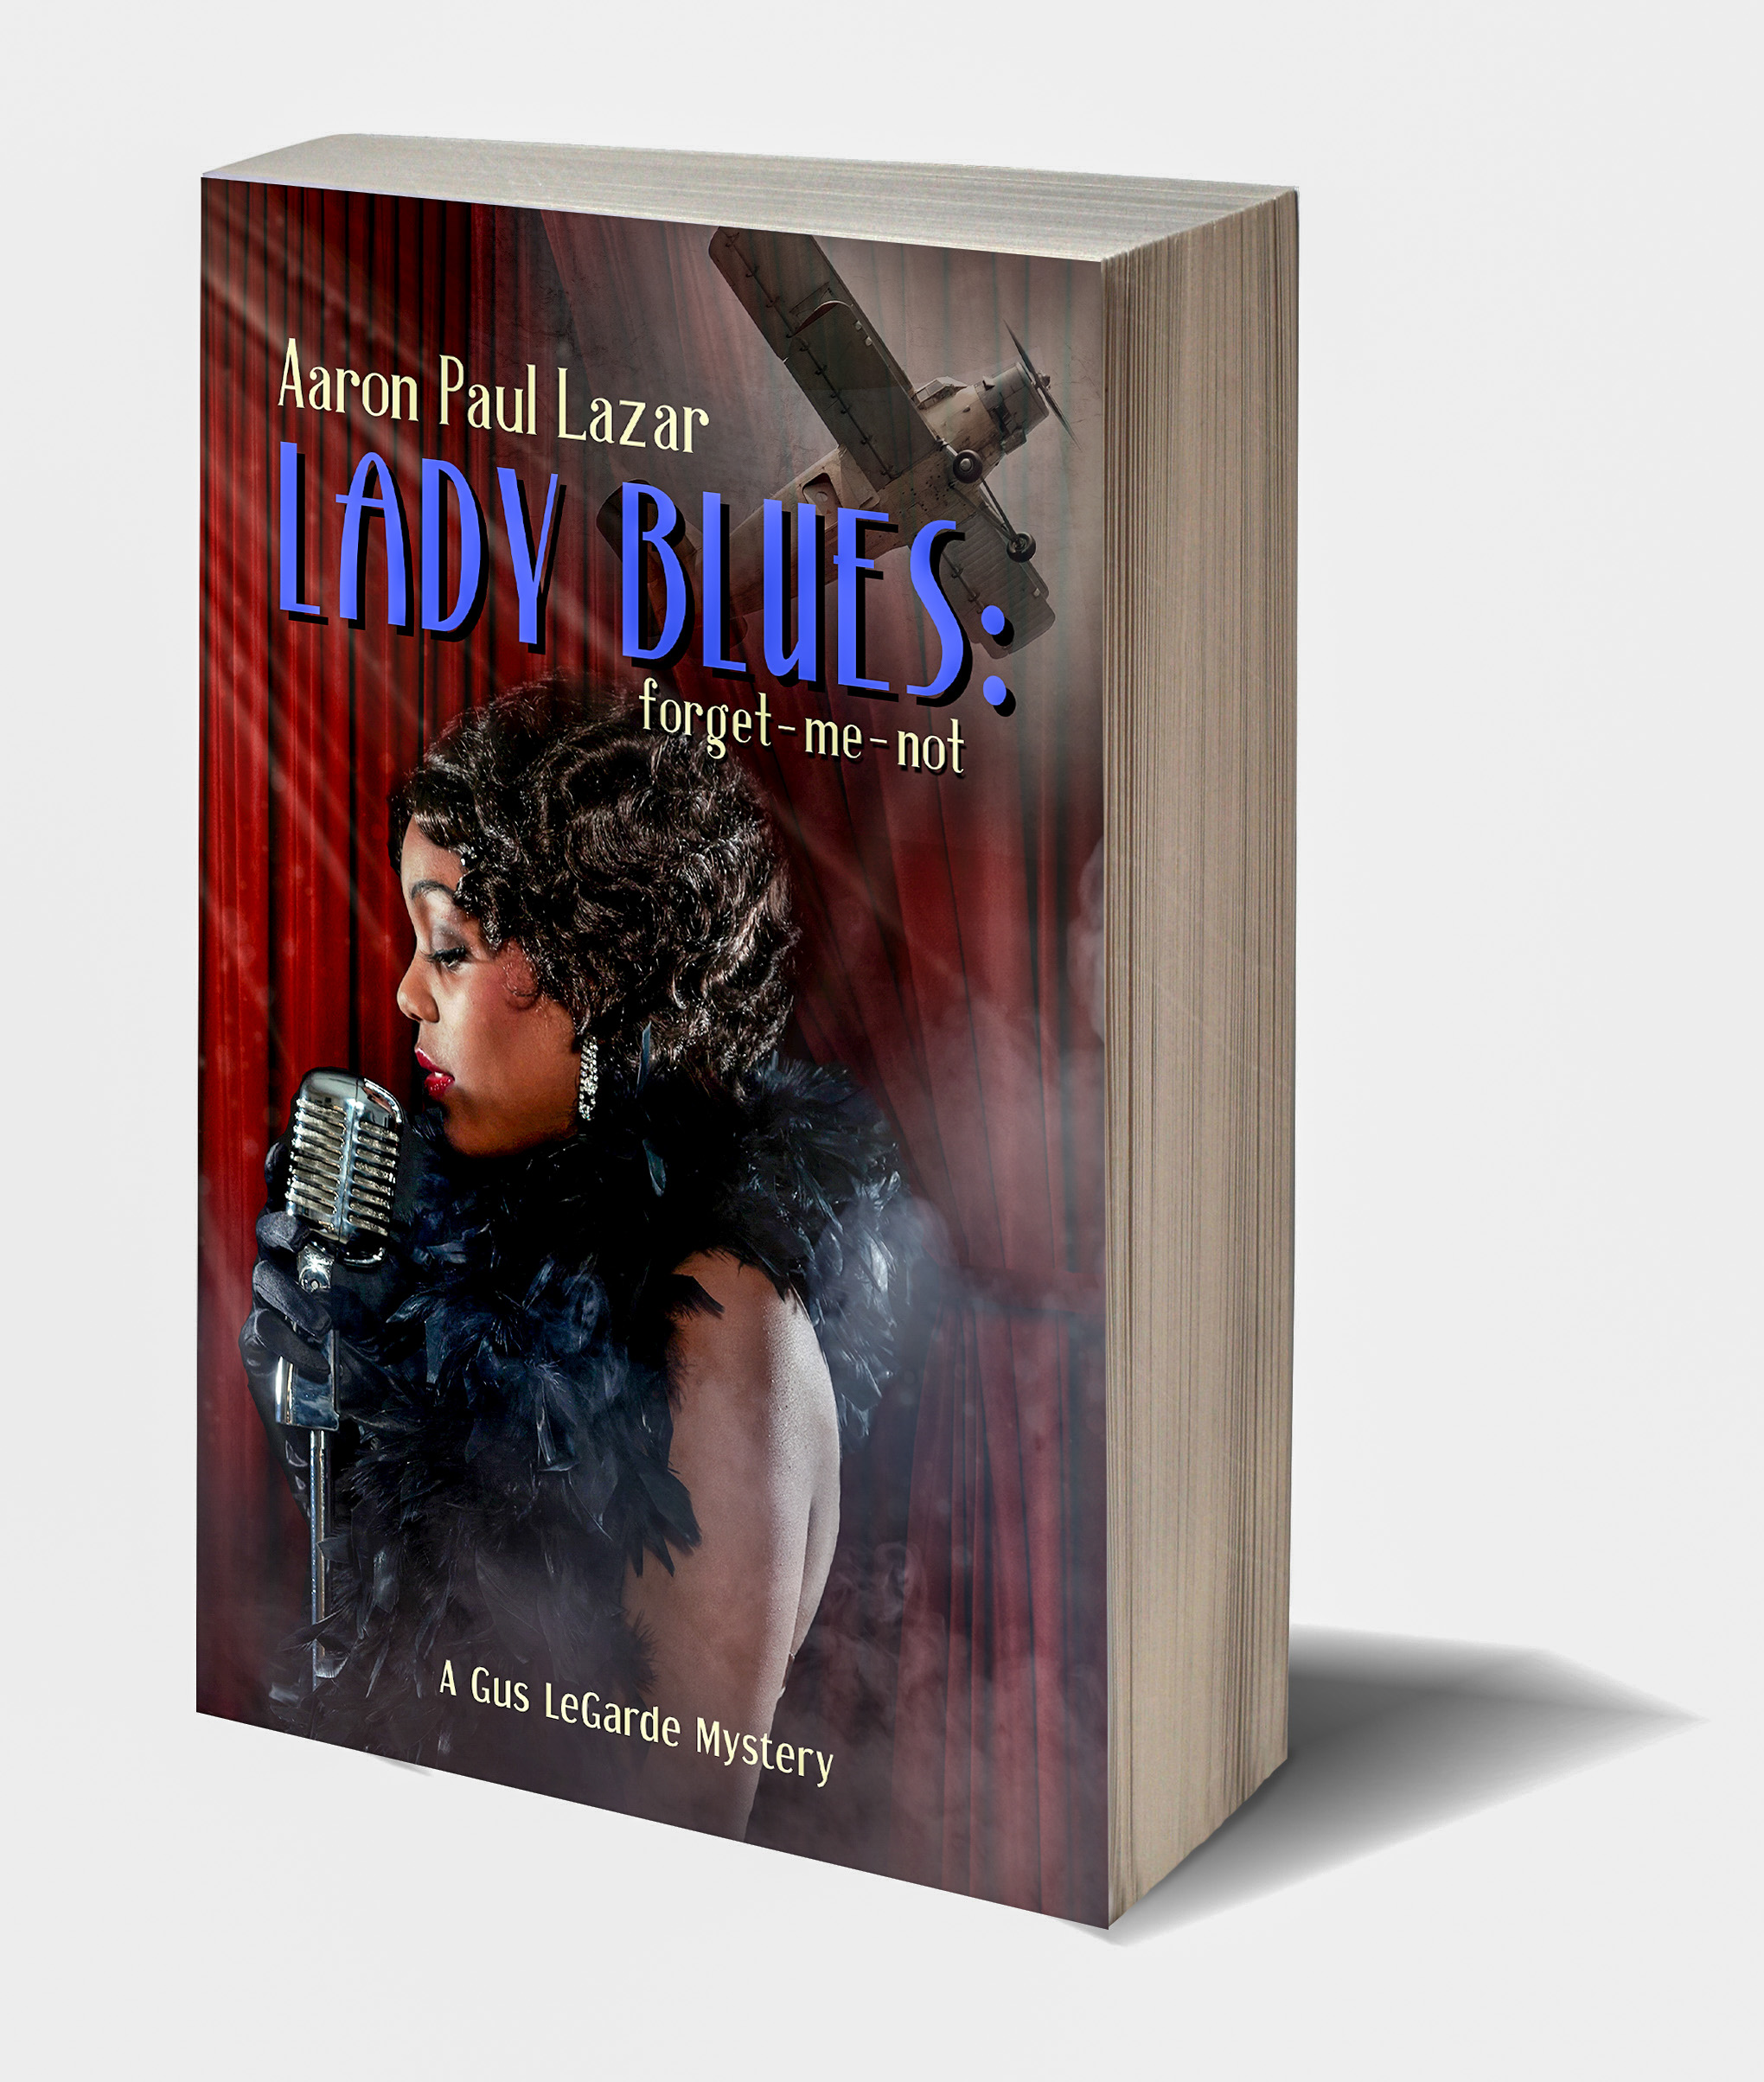 Book Review: Lady Blues: Forget-Me-Not by Aaron Paul Lazar